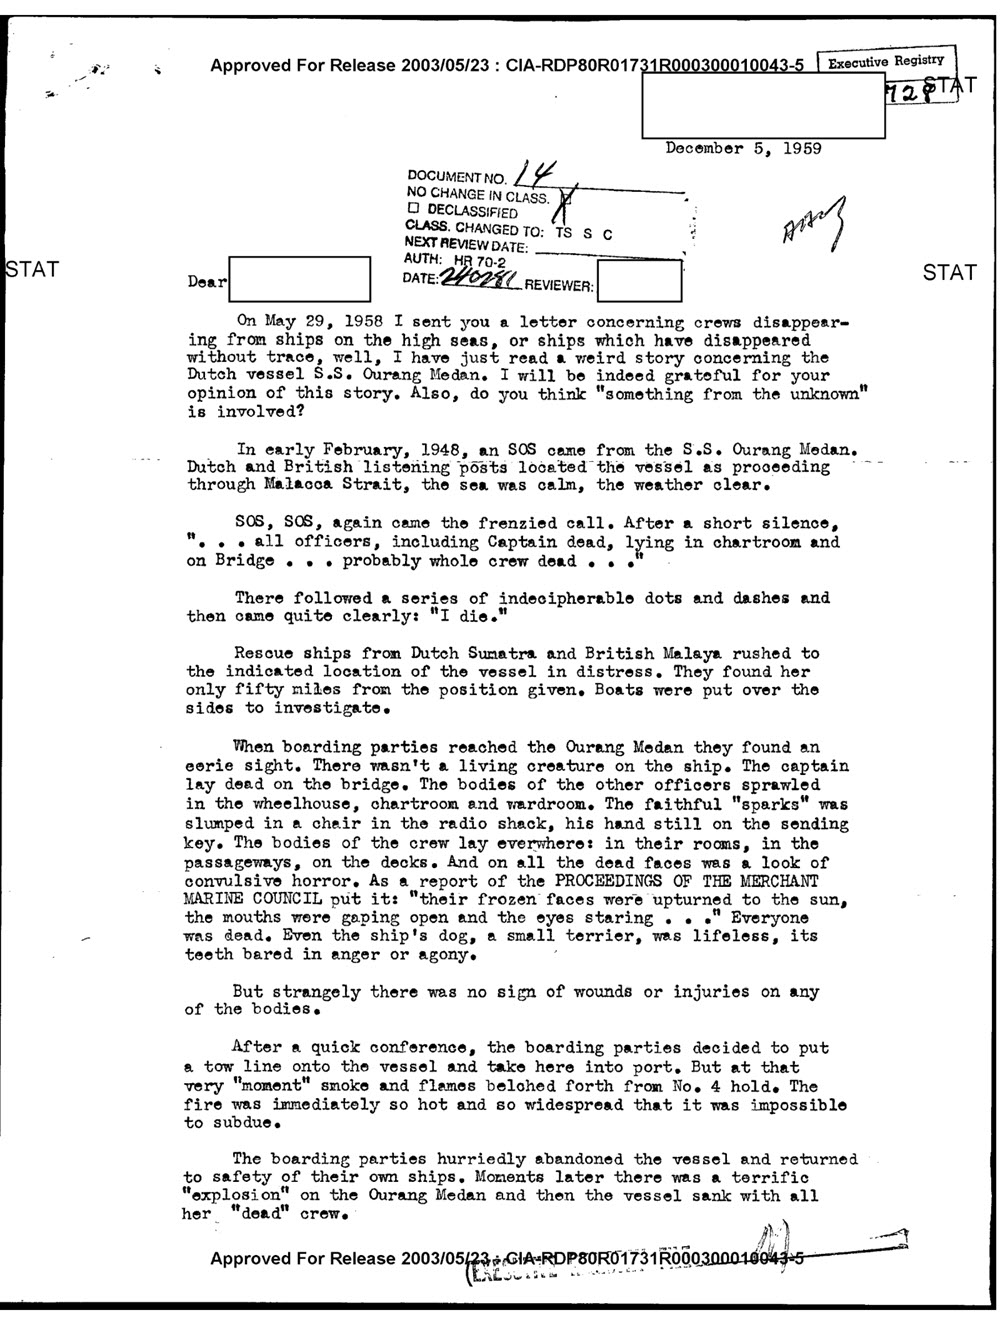 CIA Letter To (Sanitized) From C.H. Marck, Jr.  December 5, 1959, Page 1